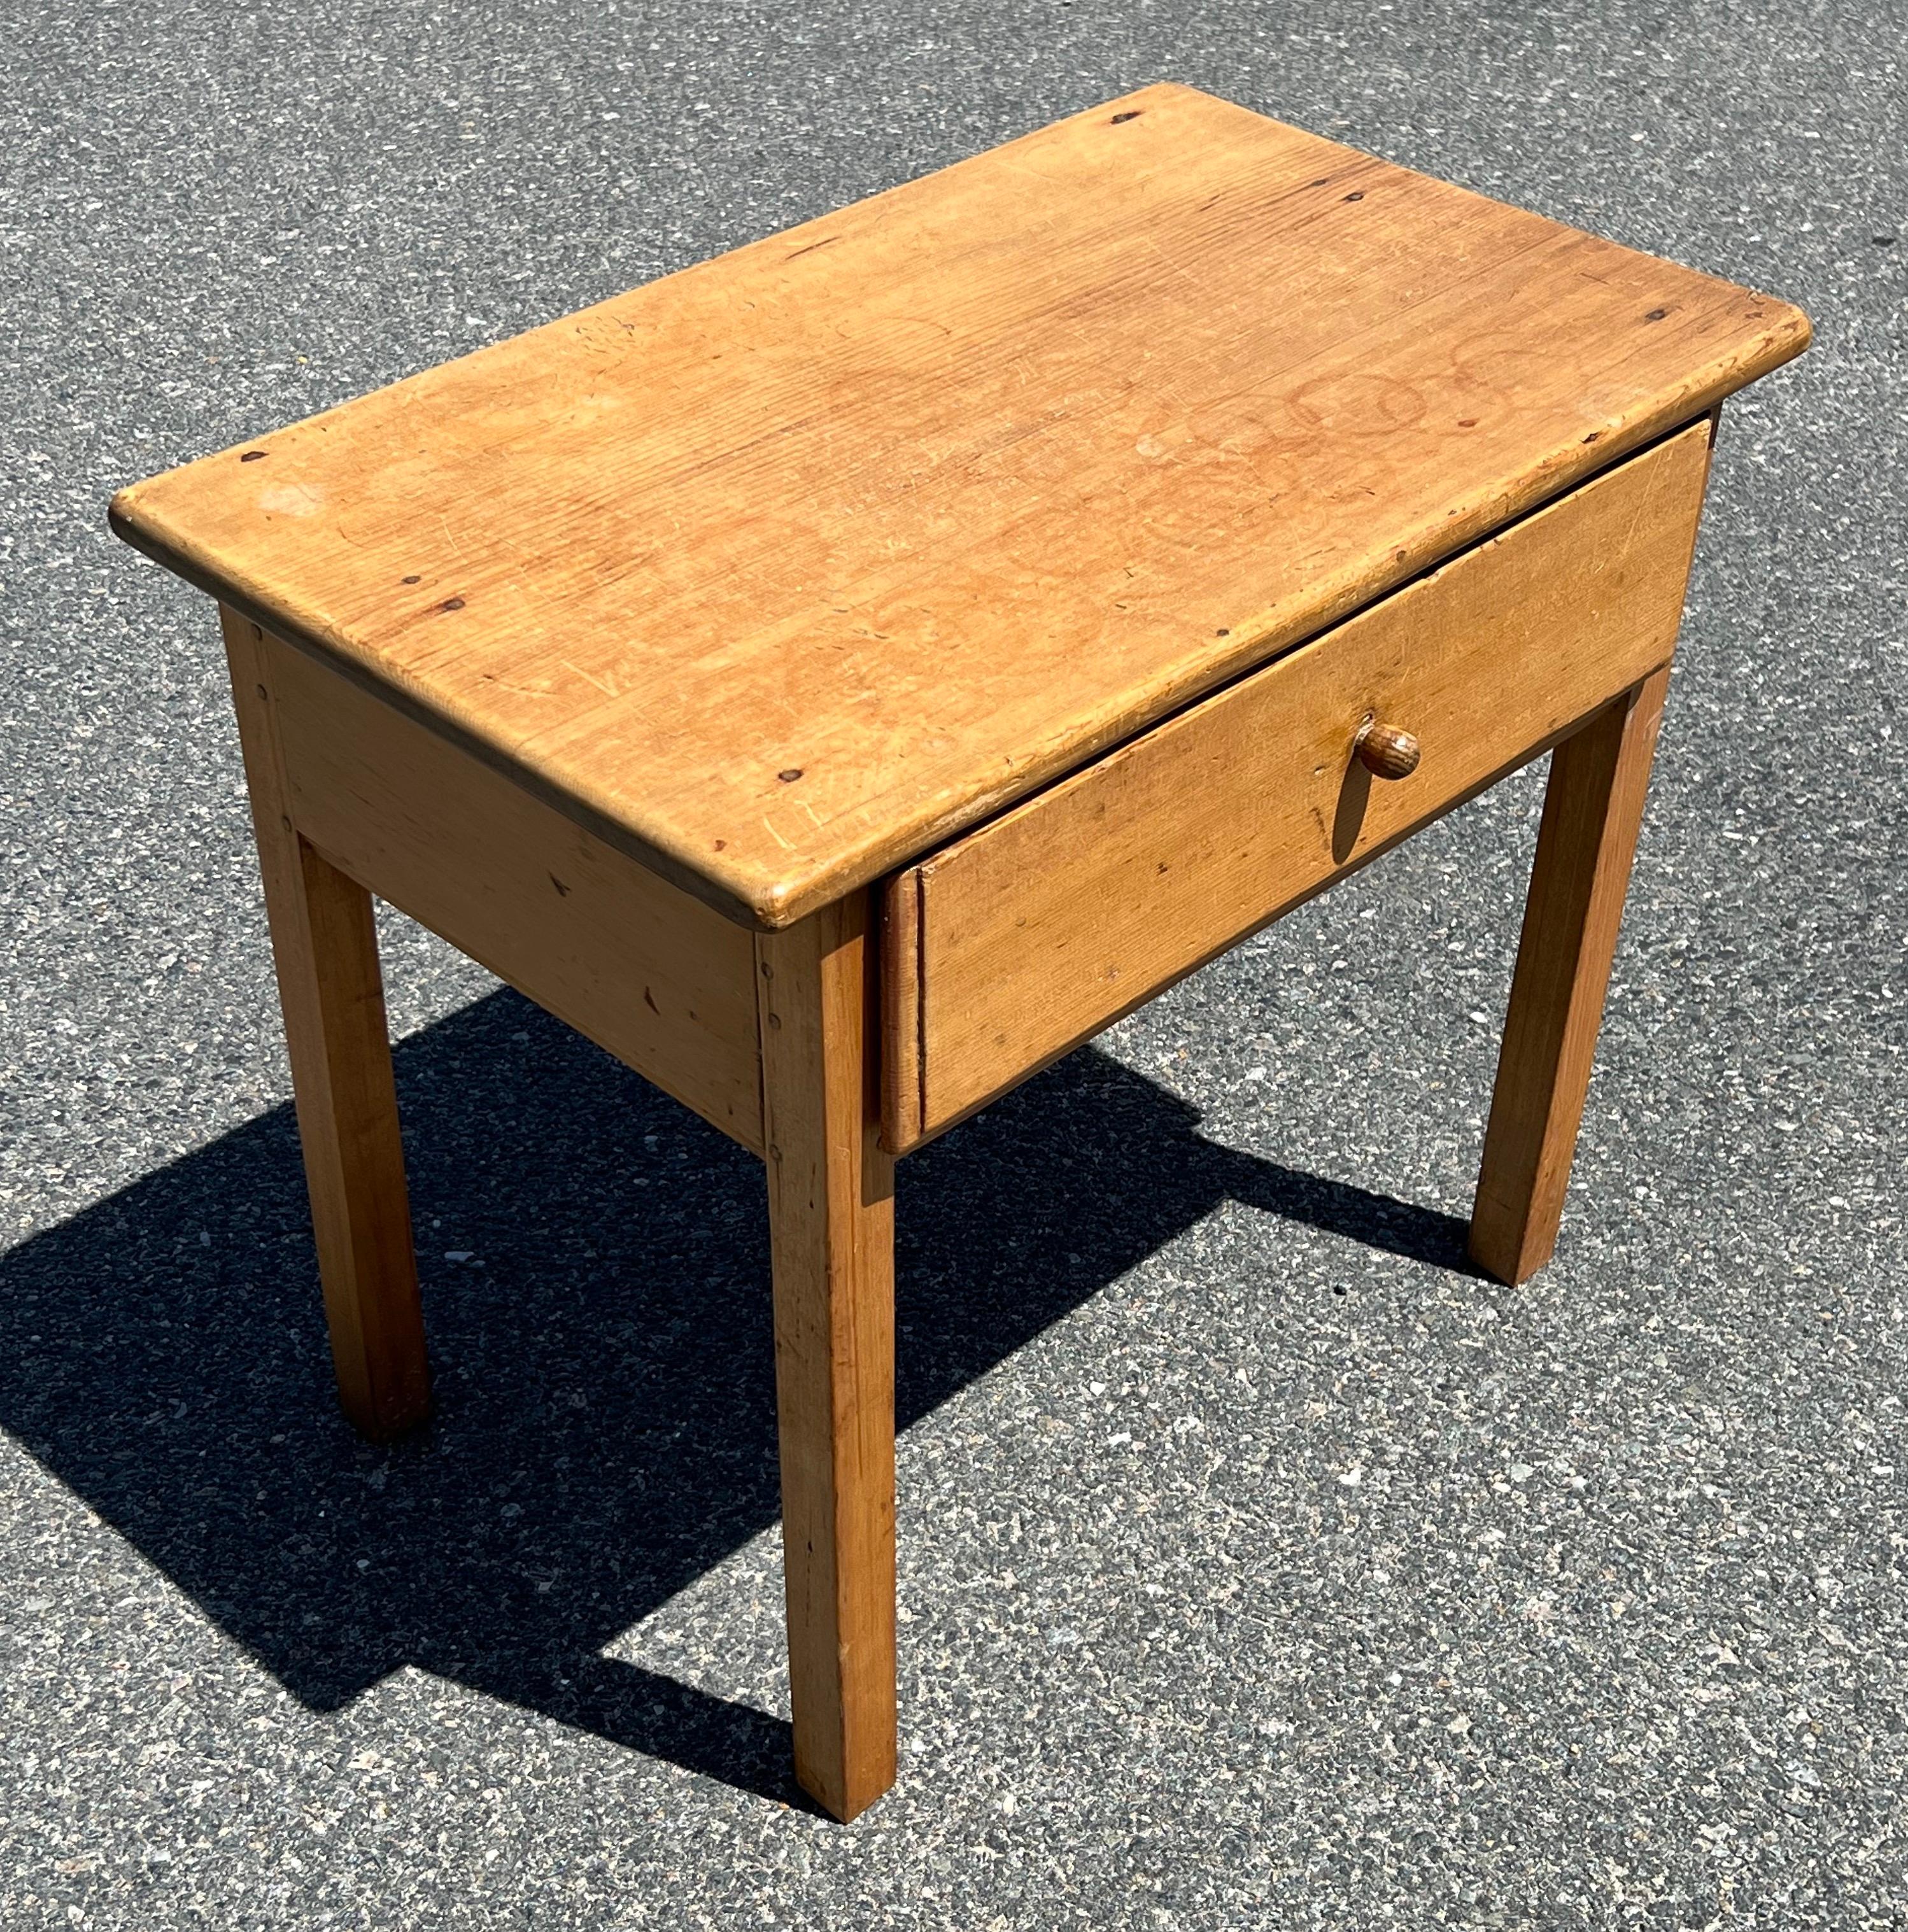 19th Century Pine Stand in natural finish with pegged construction, single drawer with large molded edge, ending on tapered legs.